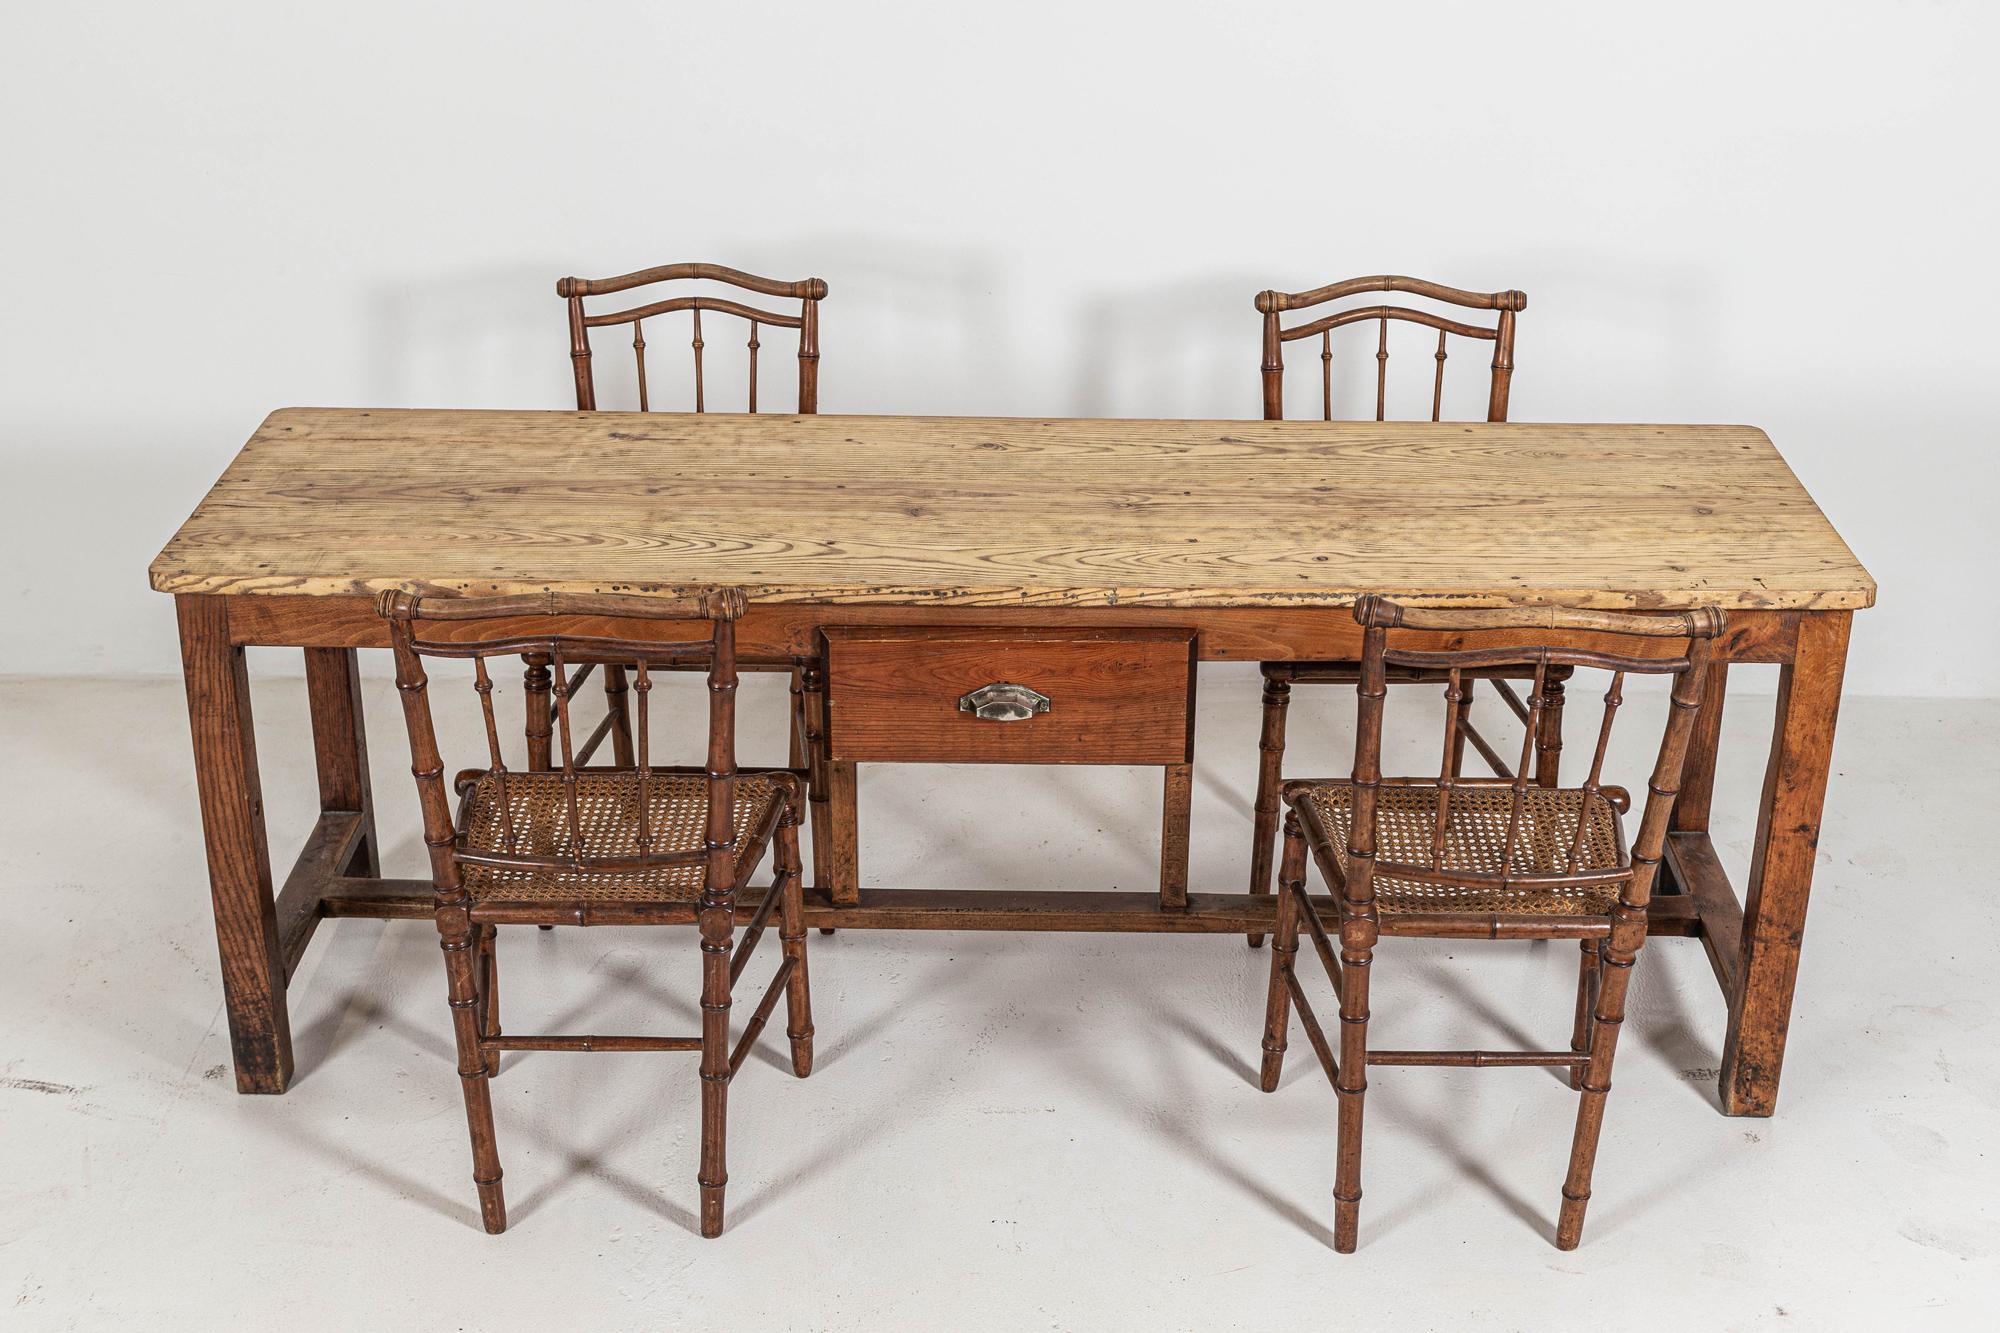 Circa 1900.

19thc French fruitwood drapers table

Could be raised as a kitchen counter/island with castors

Sourced from the South of France

  

Measures: W200 x D58 x H73 cm.